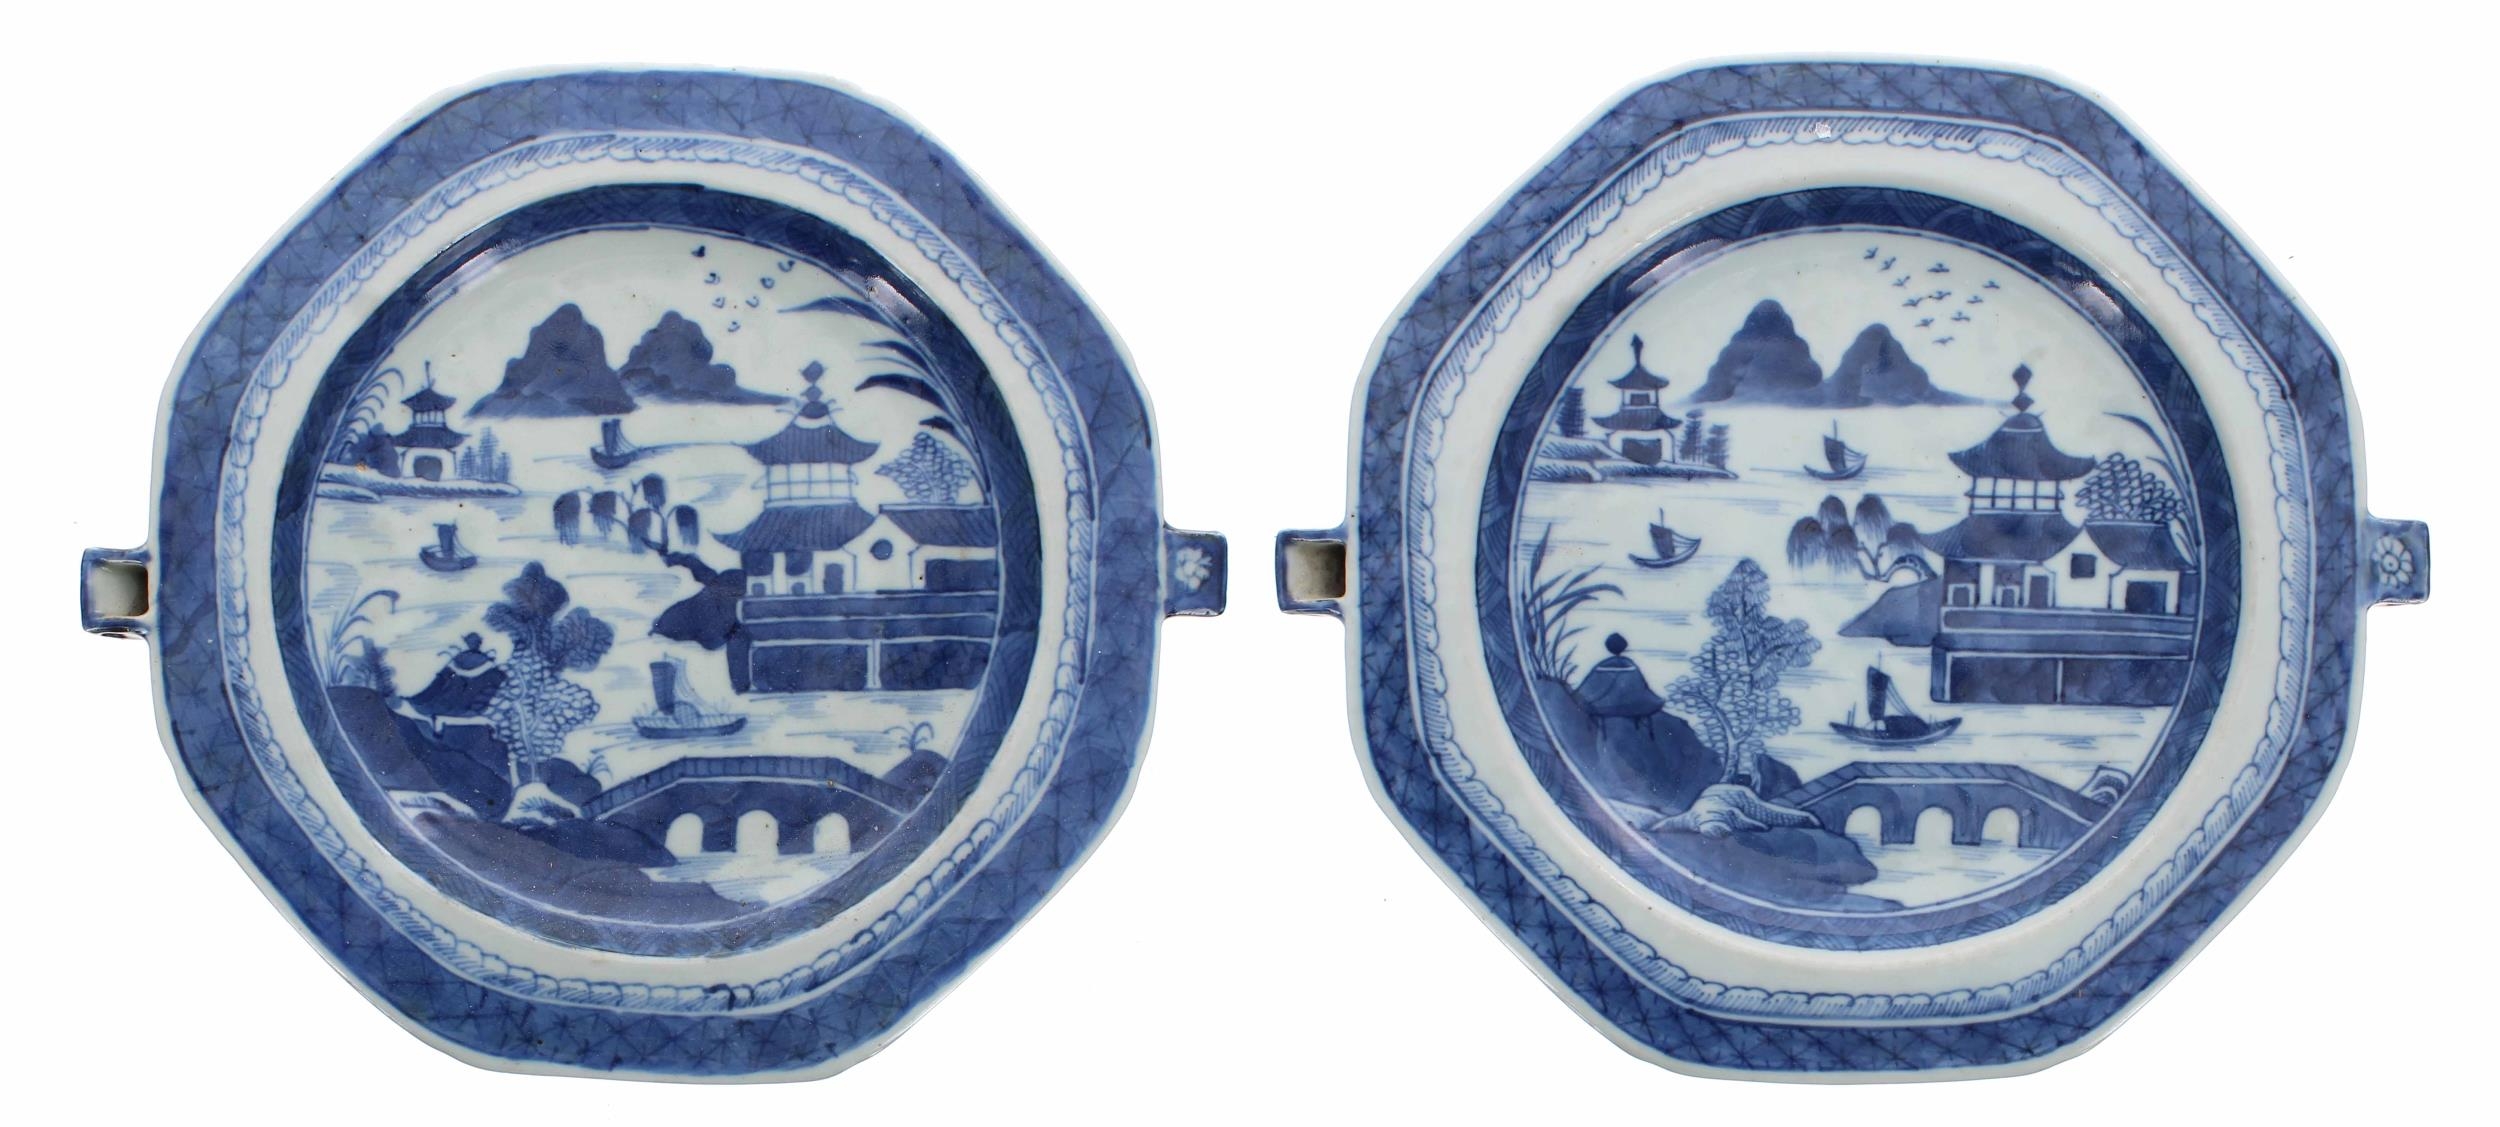 Pair of Chinese export blue and white export porcelain octagonal warming plates, decorated with - Image 4 of 4